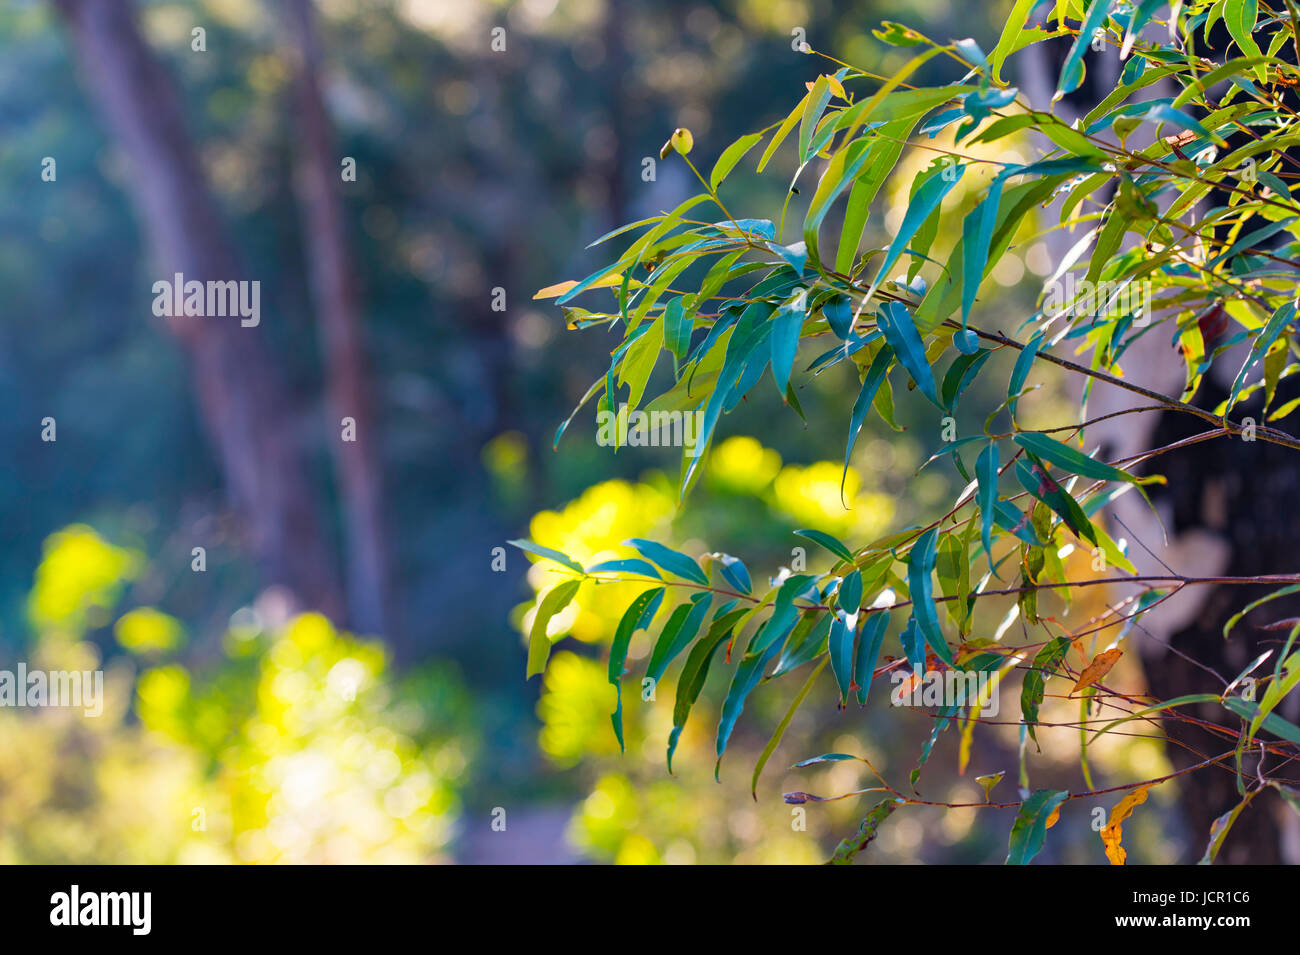 A young Eucalypt (Gum) tree growing in Sydney bushland with bushfire scarred trees in the background. Stock Photo